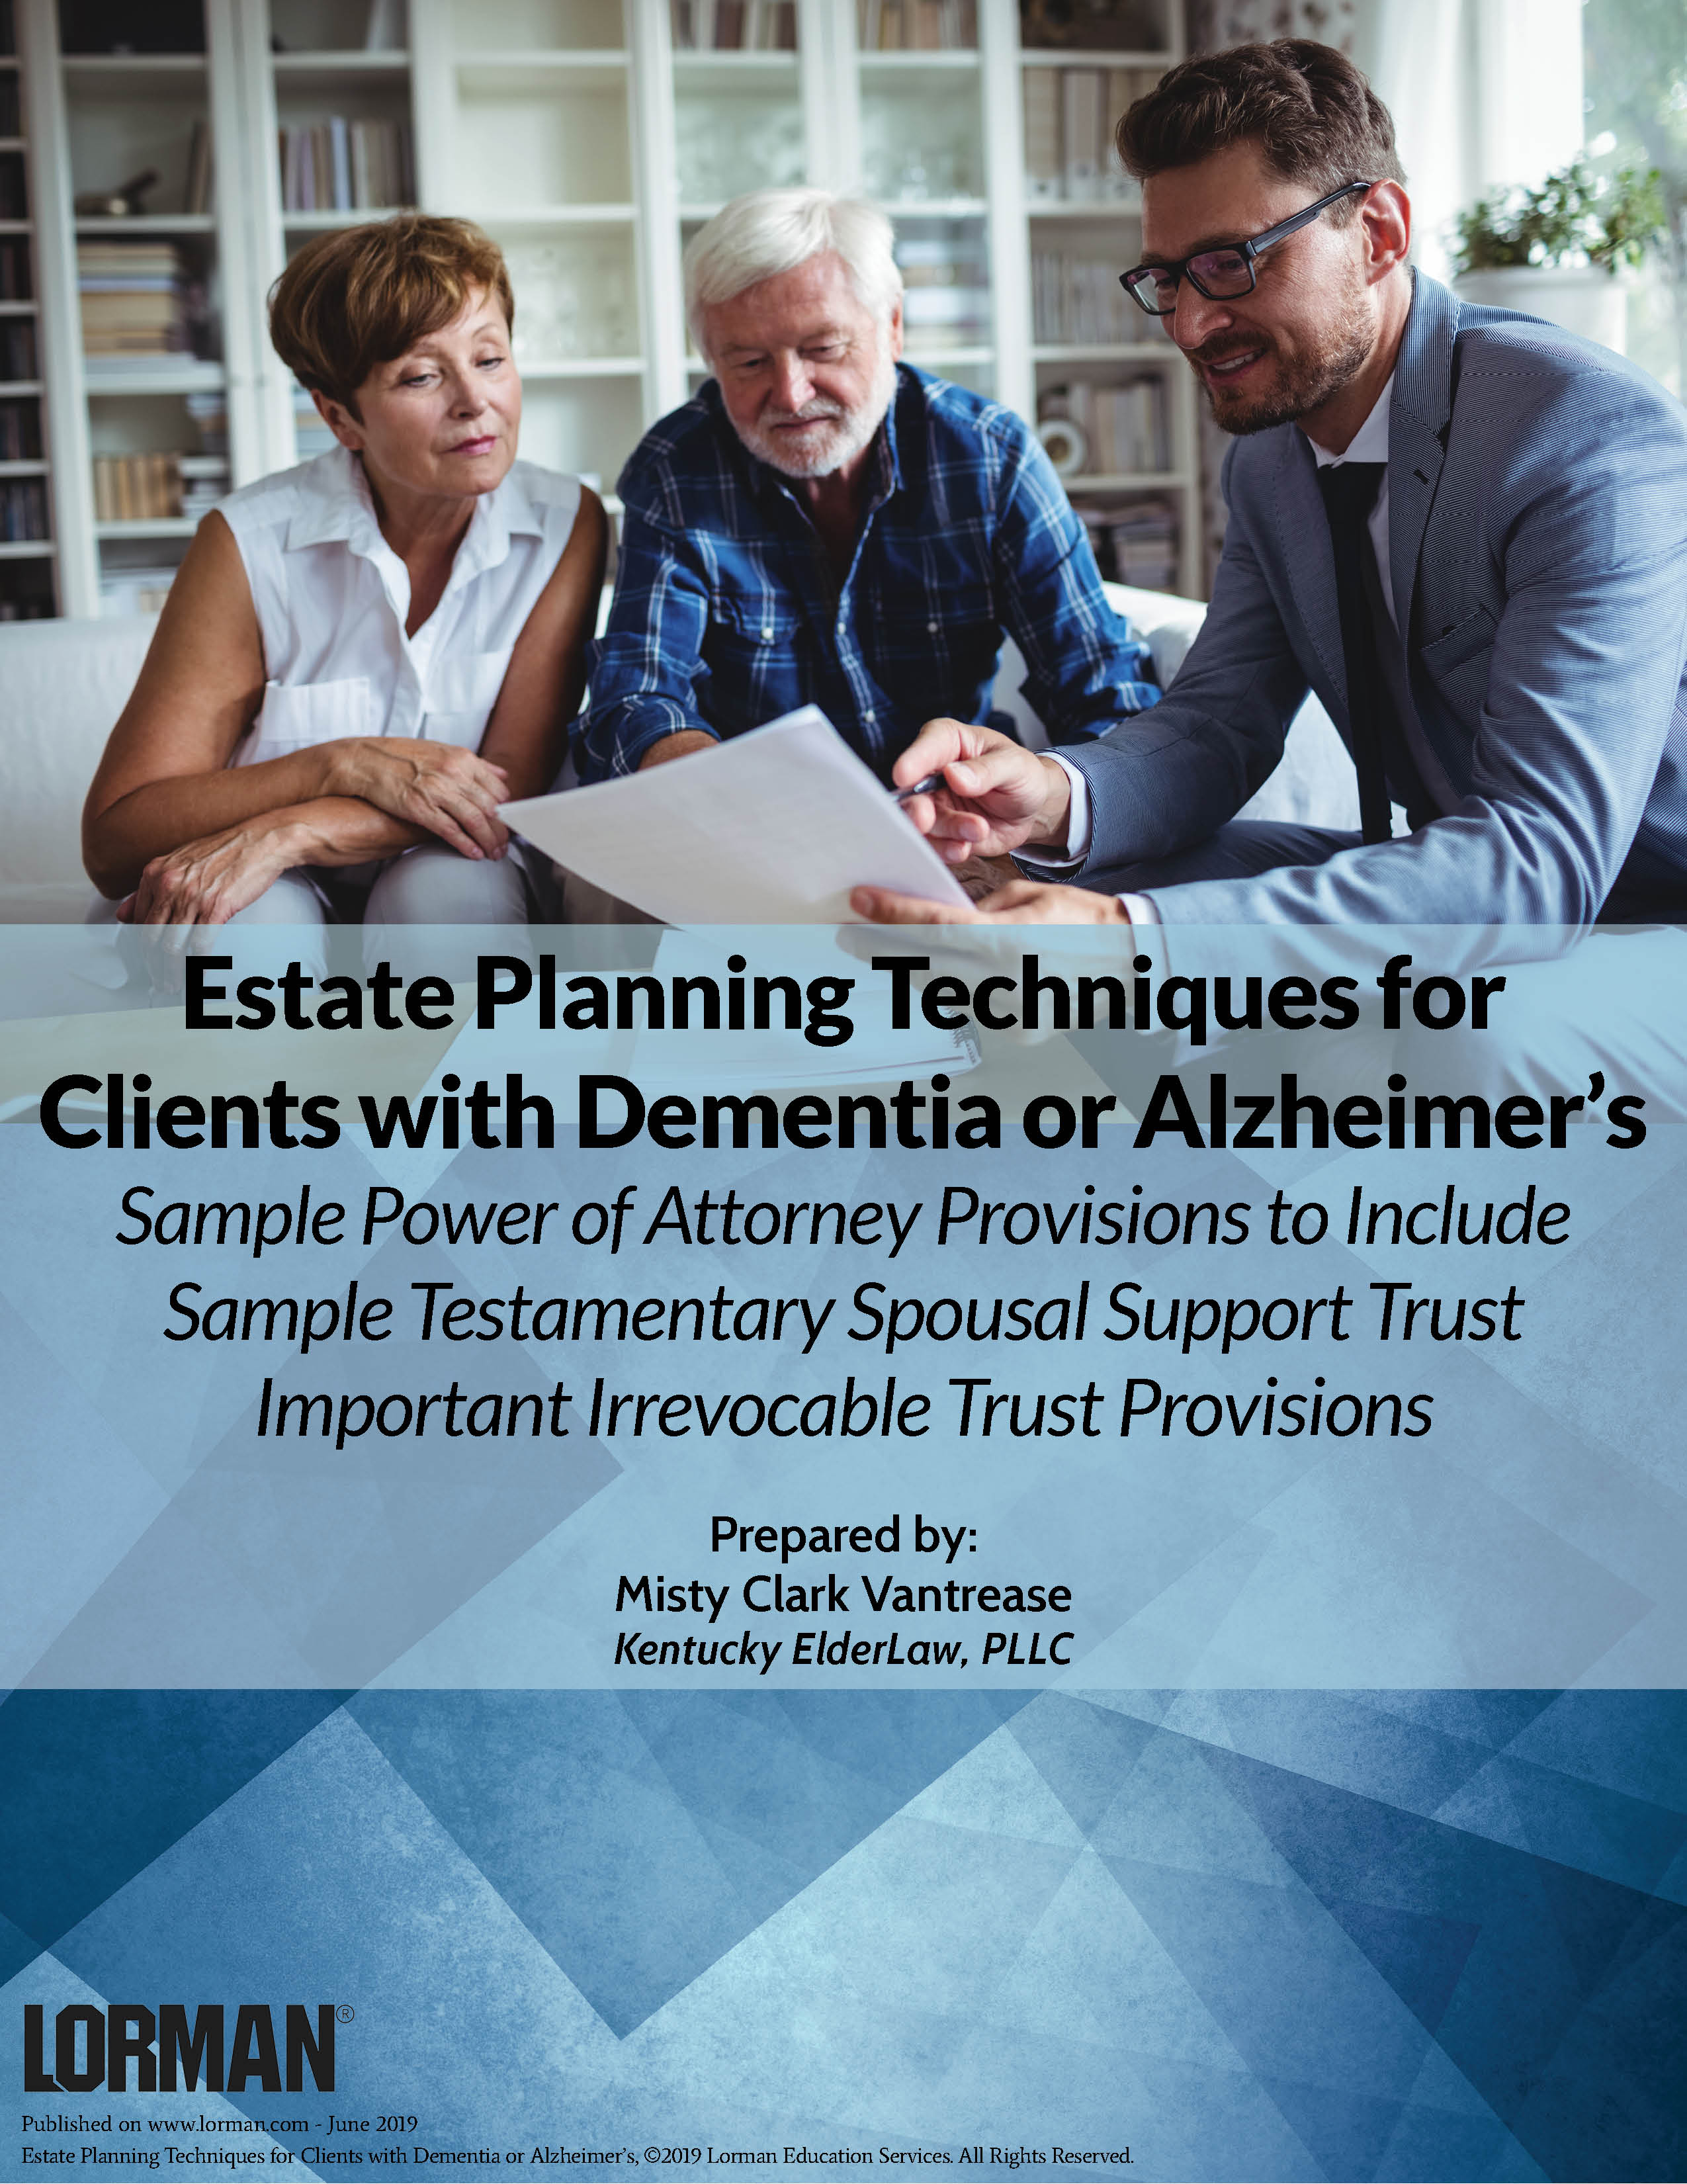 Estate Planning Techniques for Clients with Dementia or Alzheimer’s 